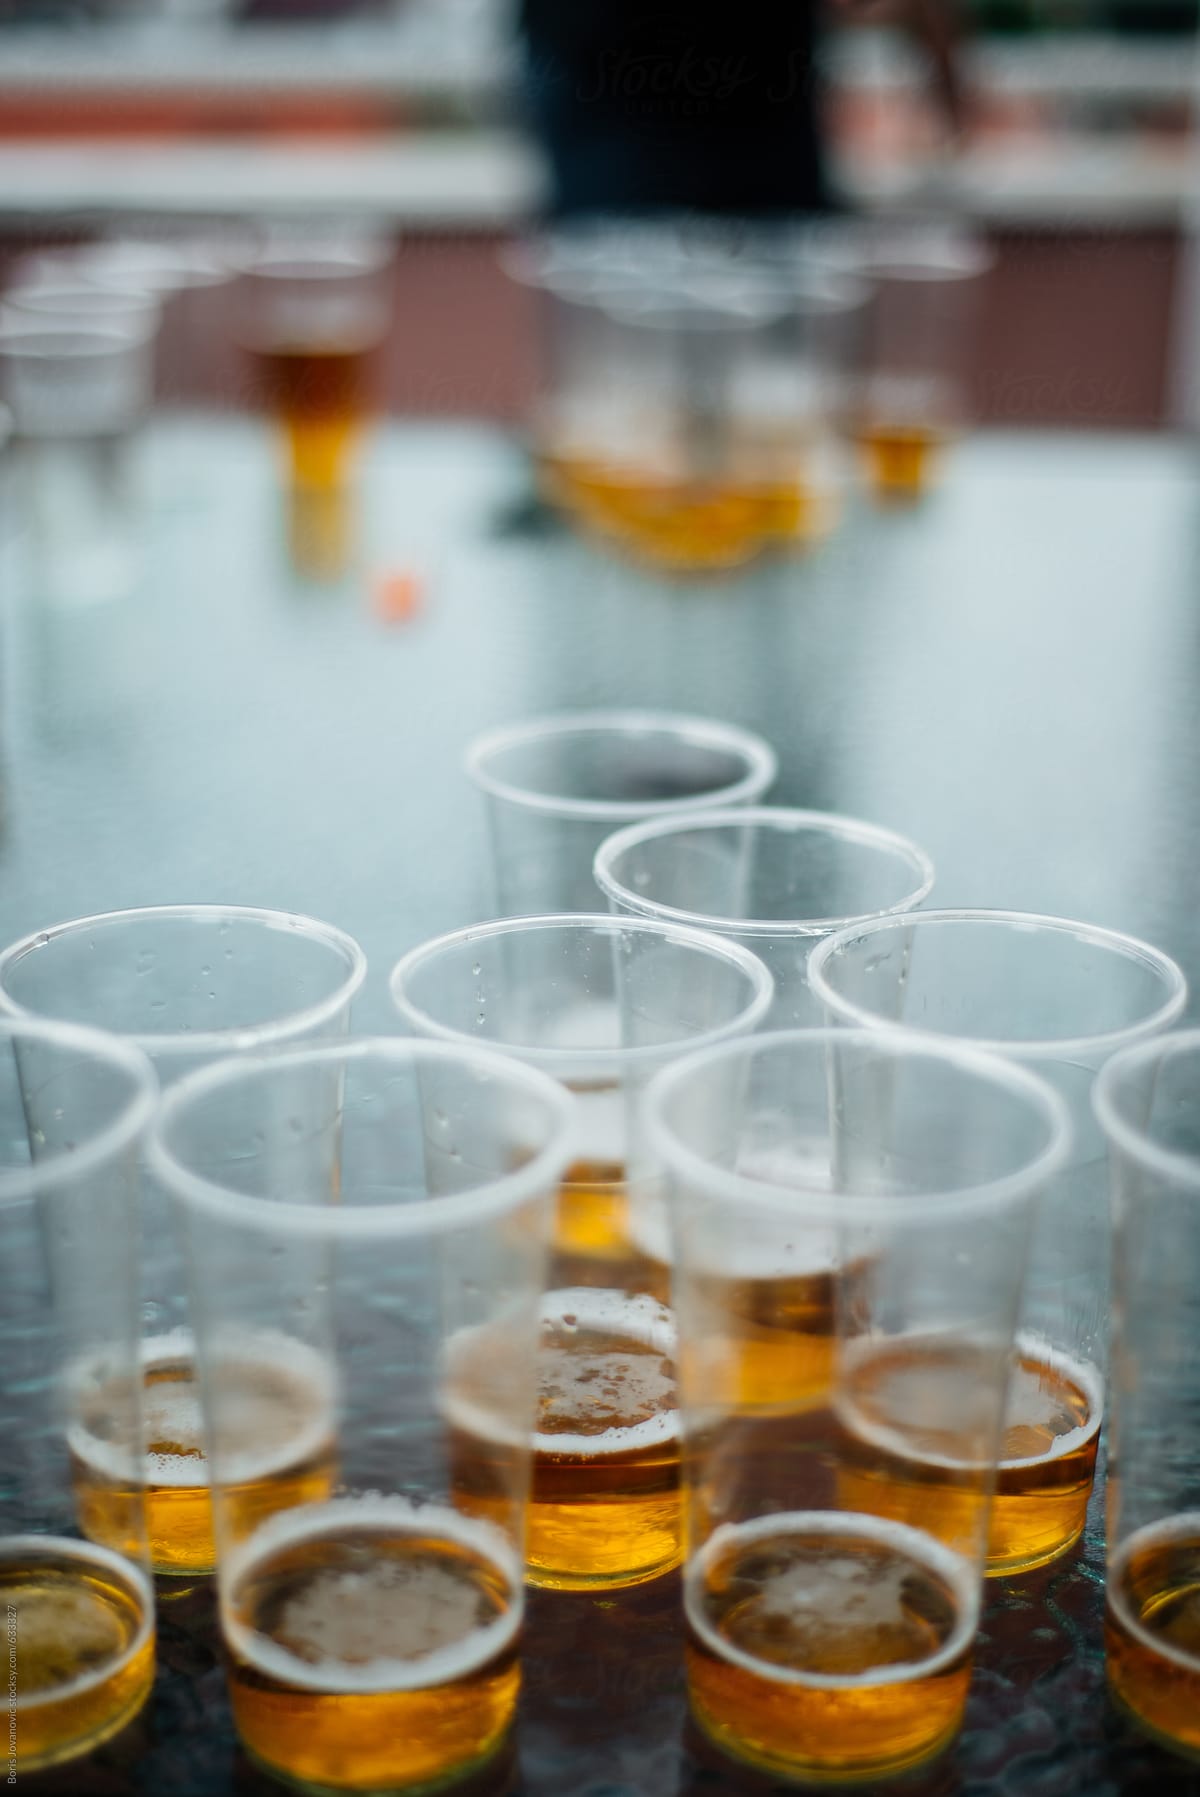 Beer pong glasses with beer